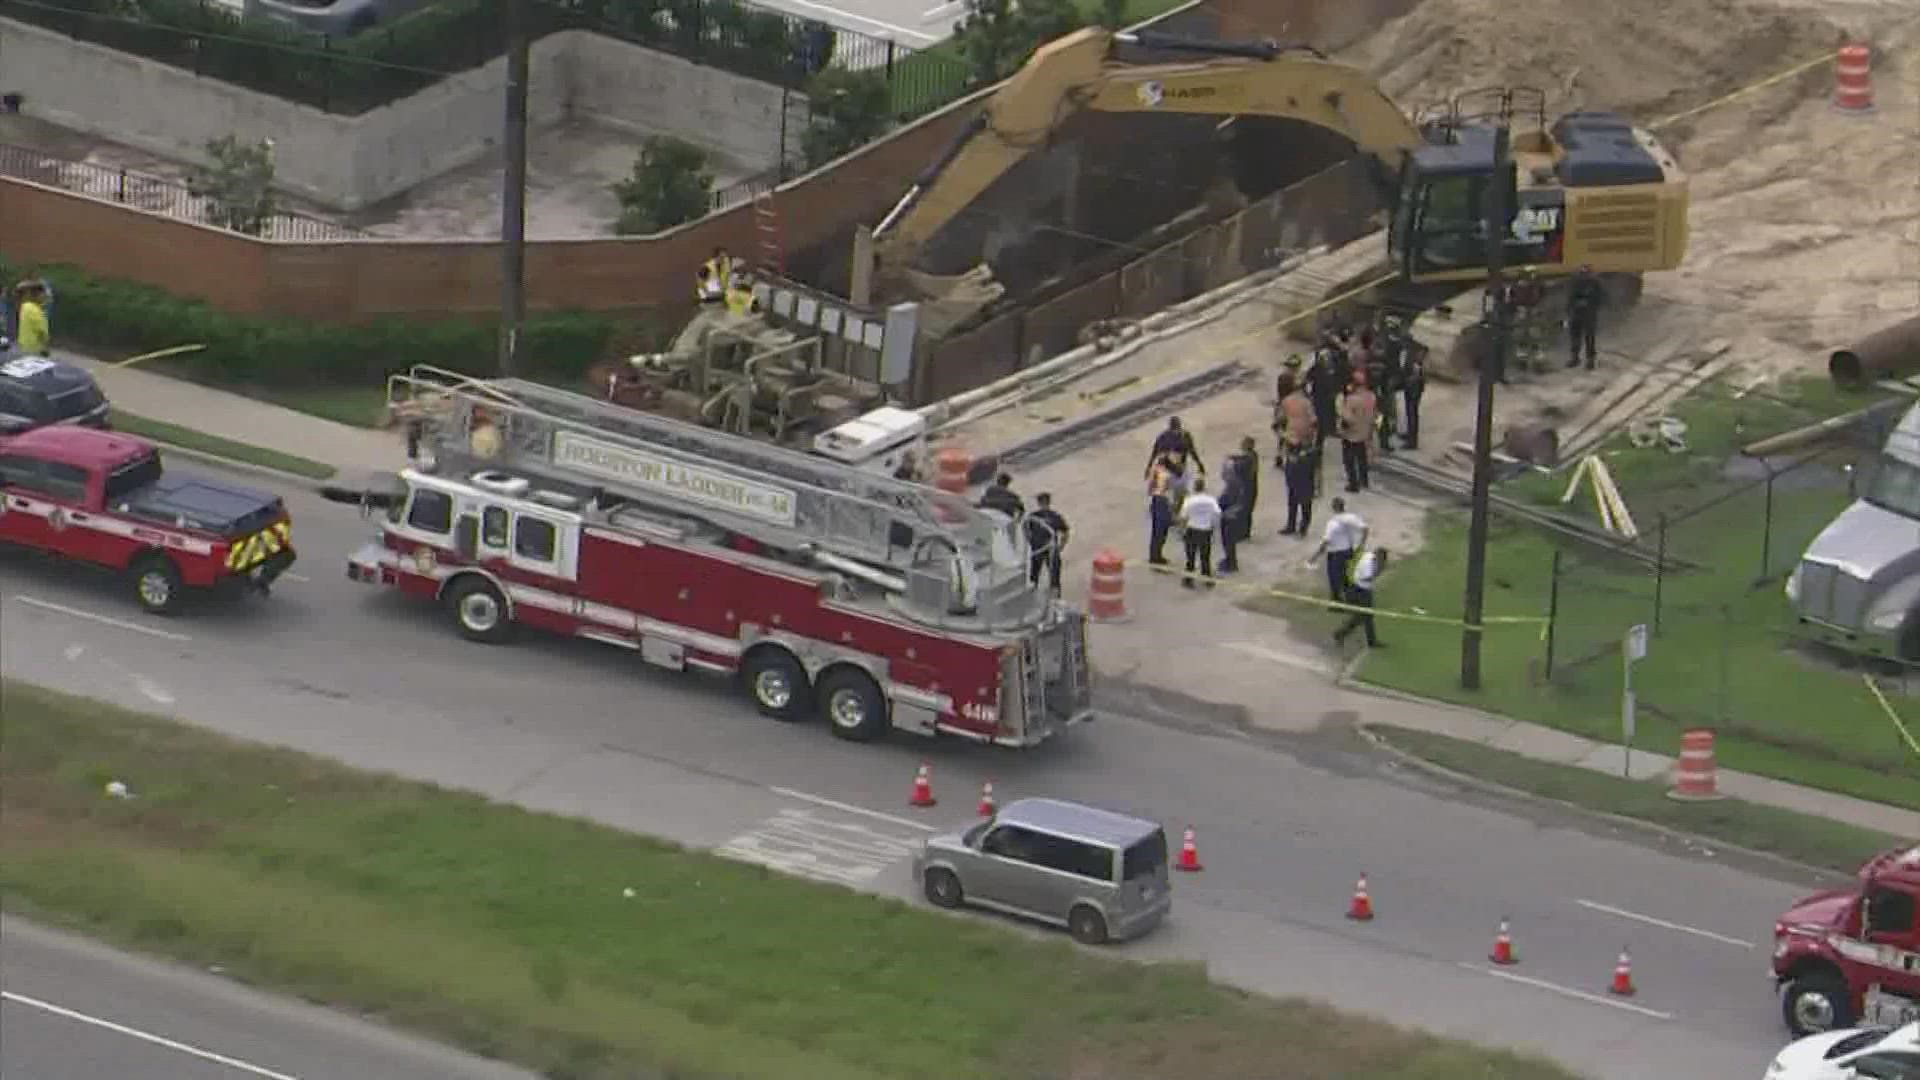 A construction worker died Tuesday after getting trapped in a machine near Normandy Street and the East Freeway, according to HFD.